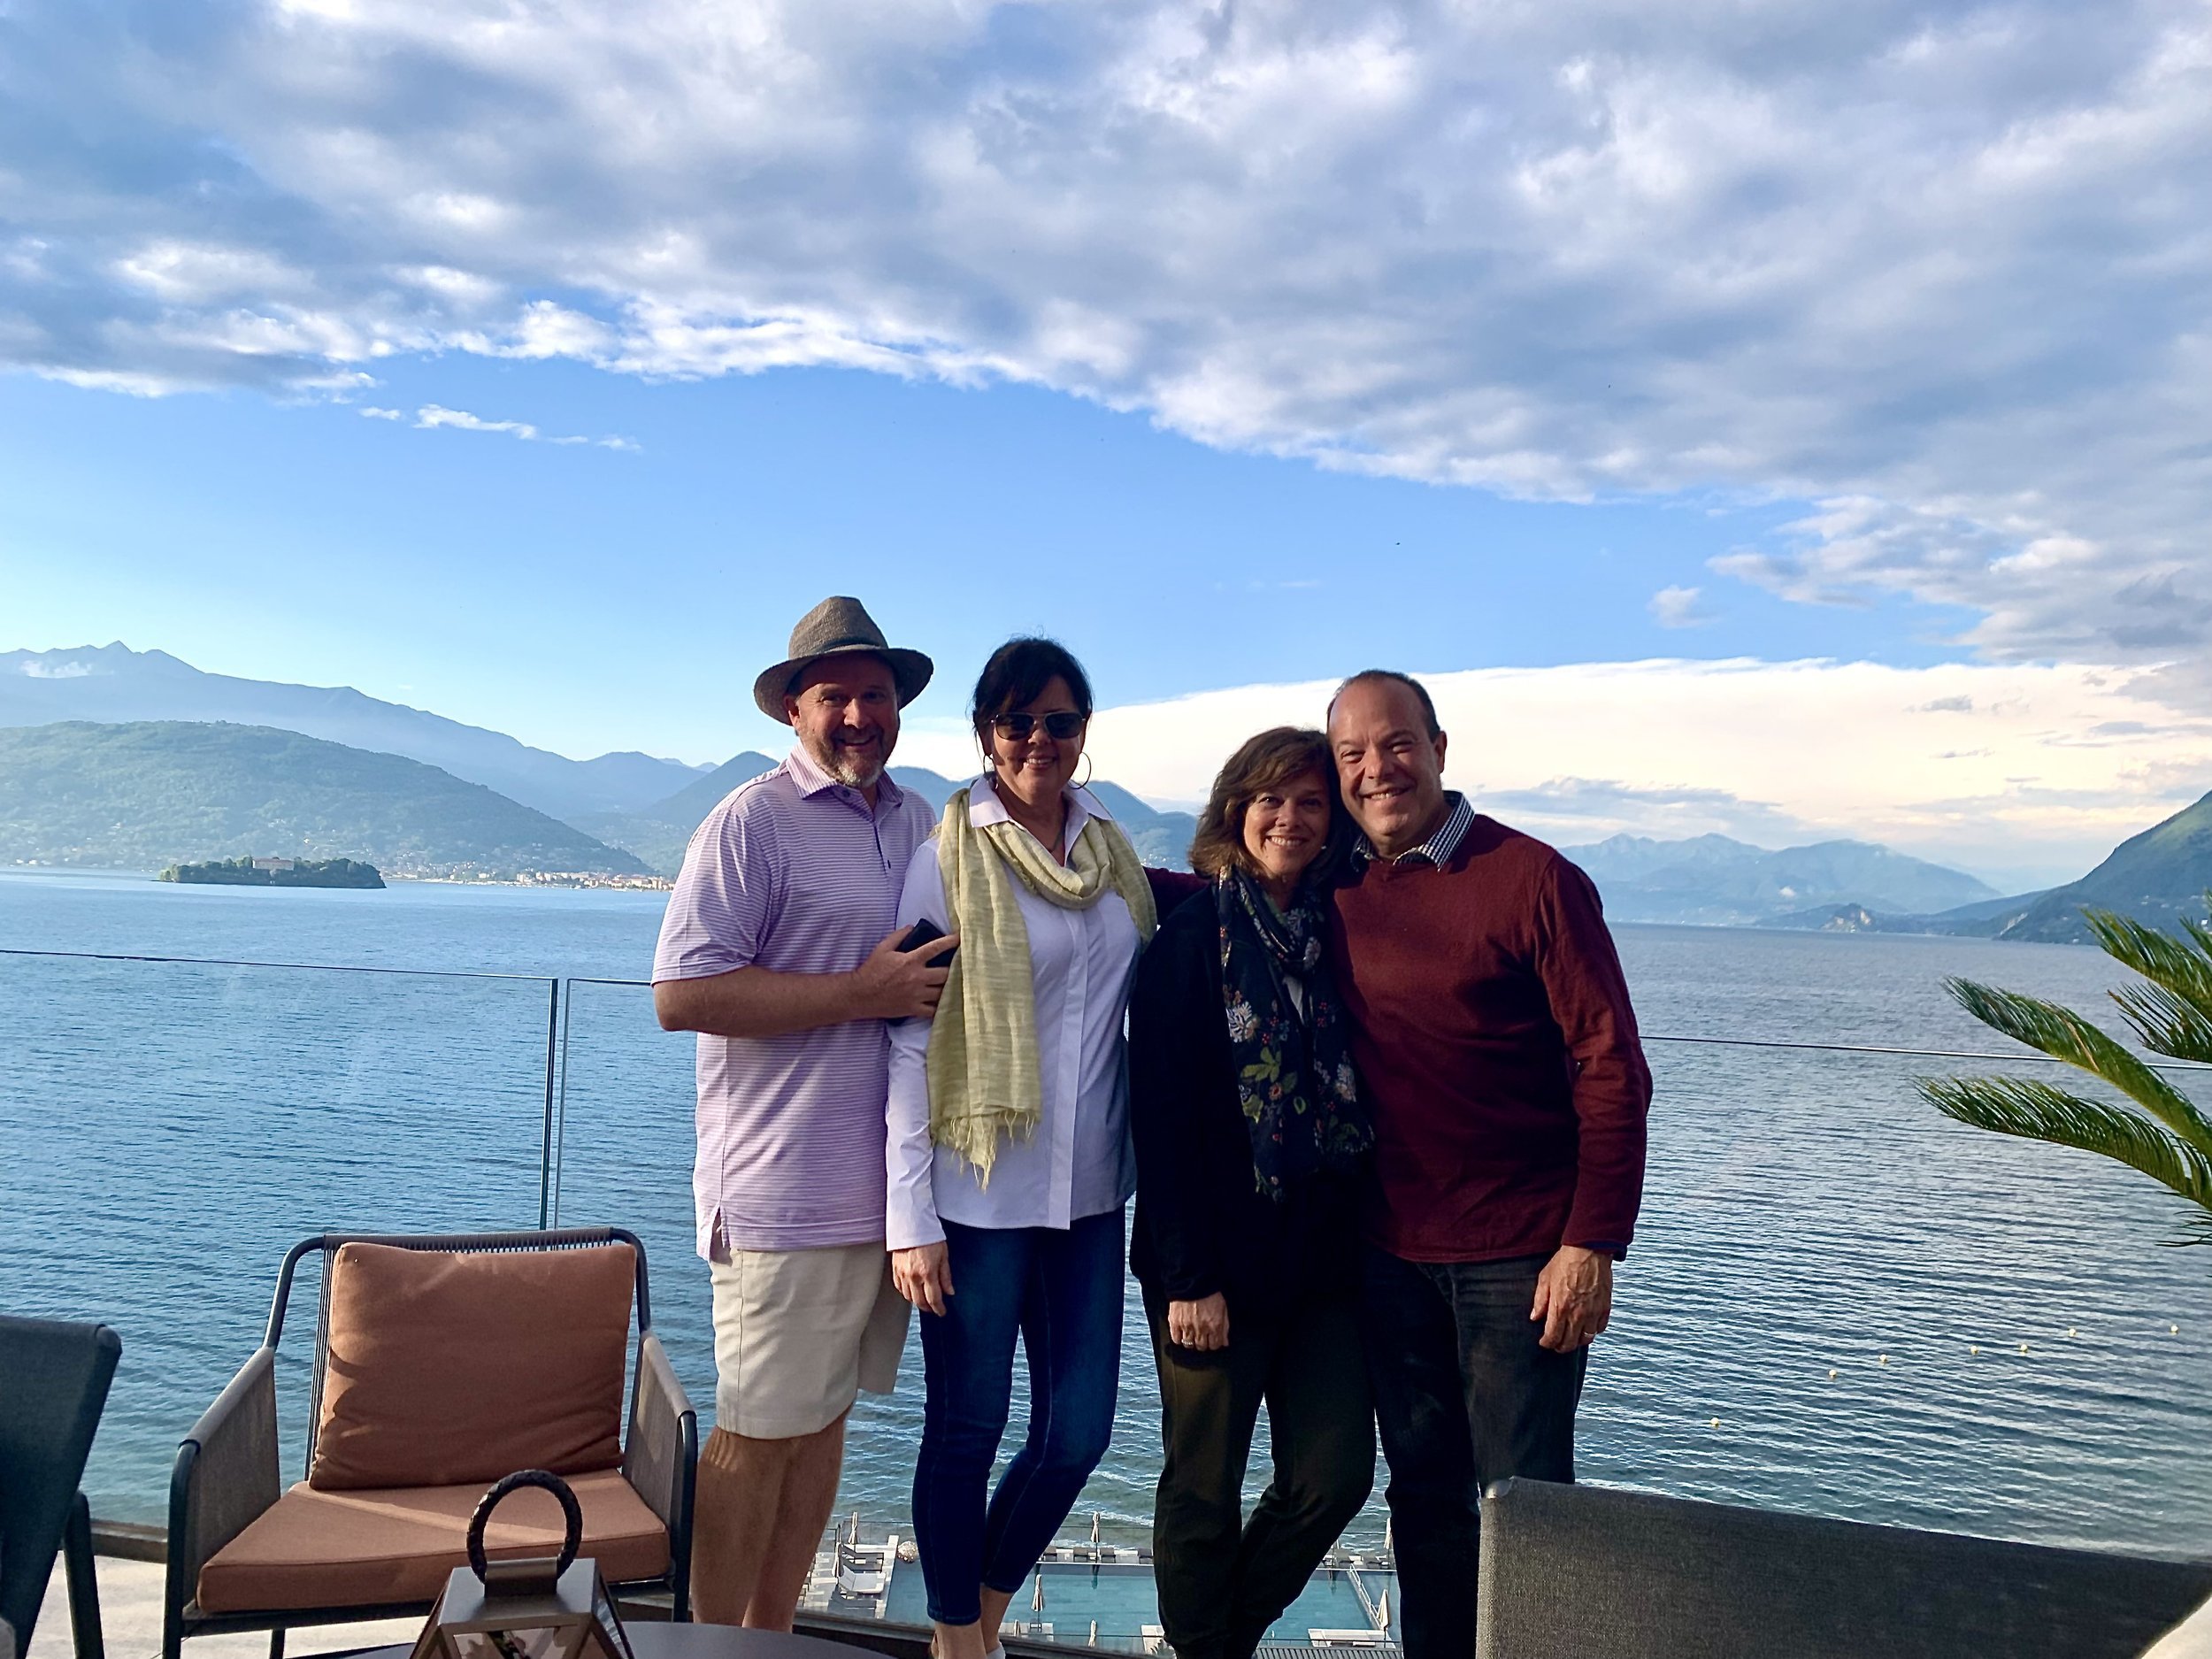 Kimber and Jimmy S. with Betsy and Greg on Lago Maggiore